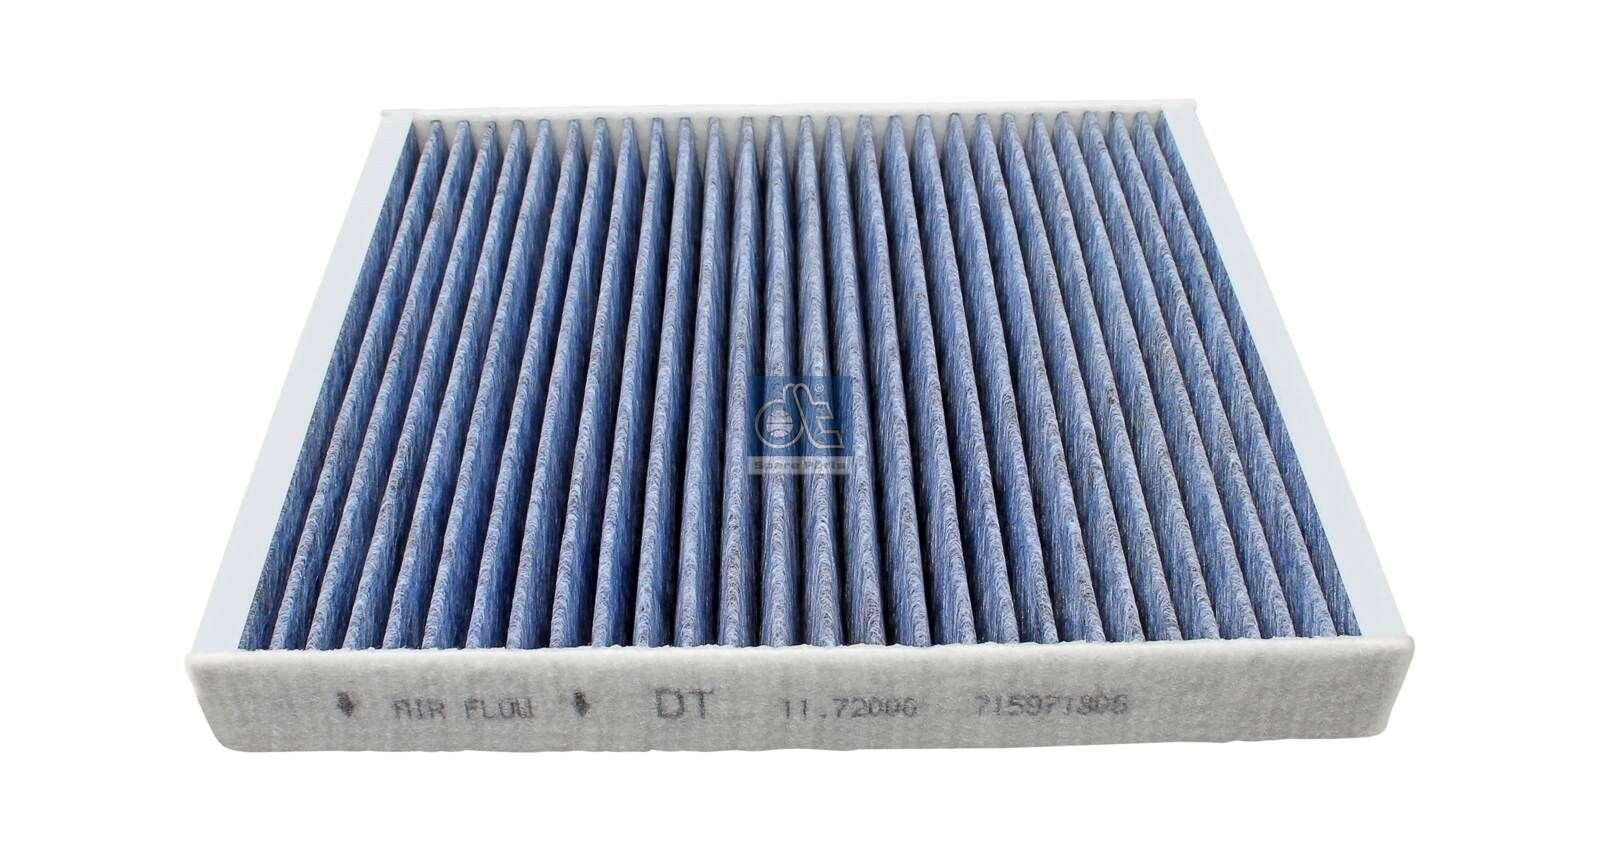 FP 26 009 DT Spare Parts bio-functional cabin air filter, 254 mm x 235 mm x 32 mm Width: 235mm, Height: 32mm, Length: 254mm Cabin filter 11.72000 buy